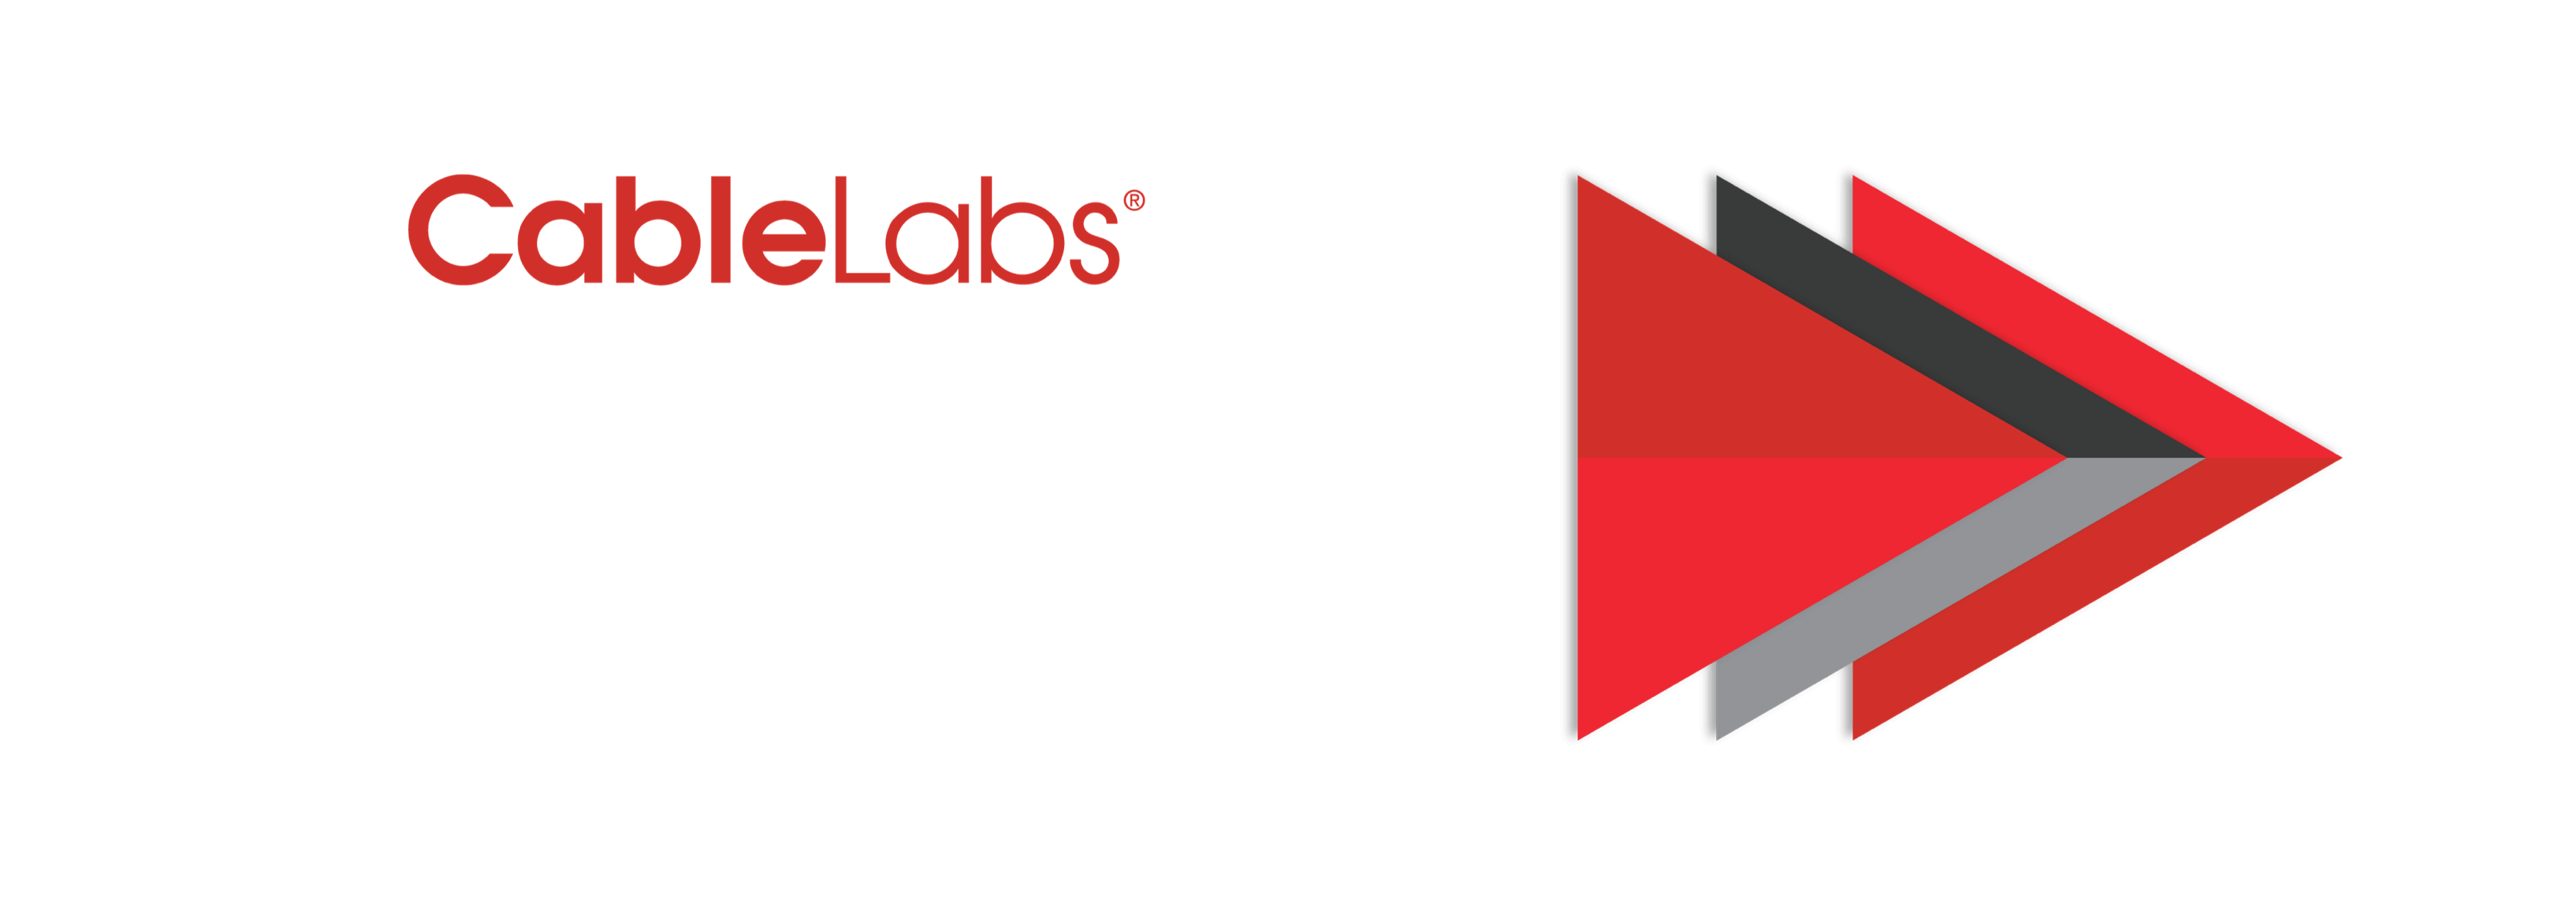 CableLabs Europe Conference 2019